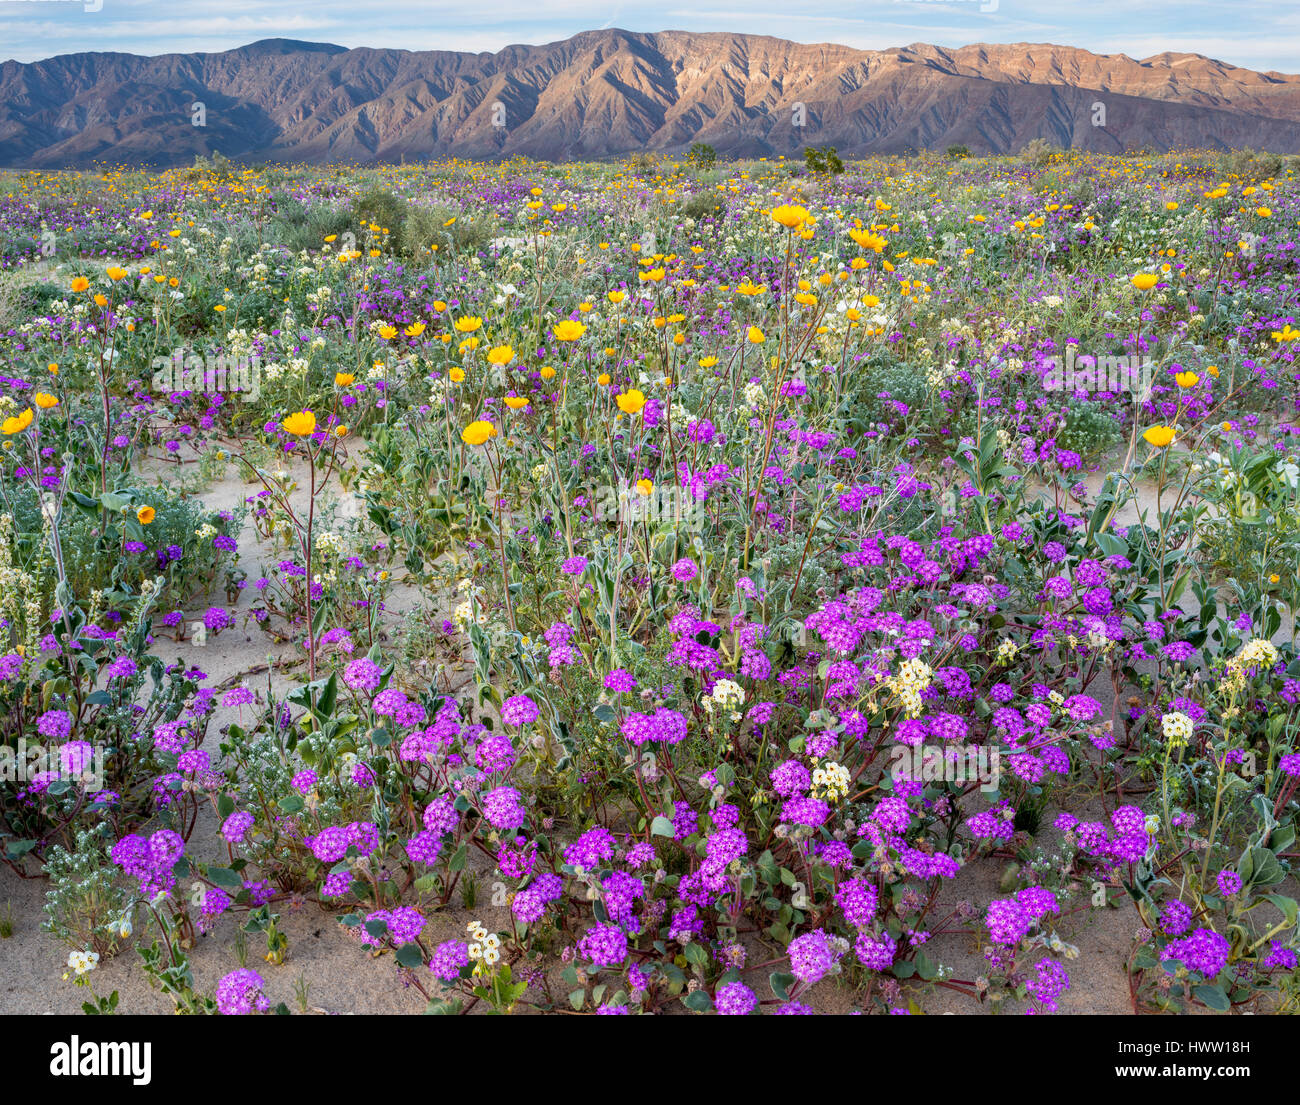 CALIFORNIA, USA: Desert landscape with flowering Sand verbena, Desert gold  and Birdcage evening primrose with the Santa Rosa Mountains in background. Stock Photo